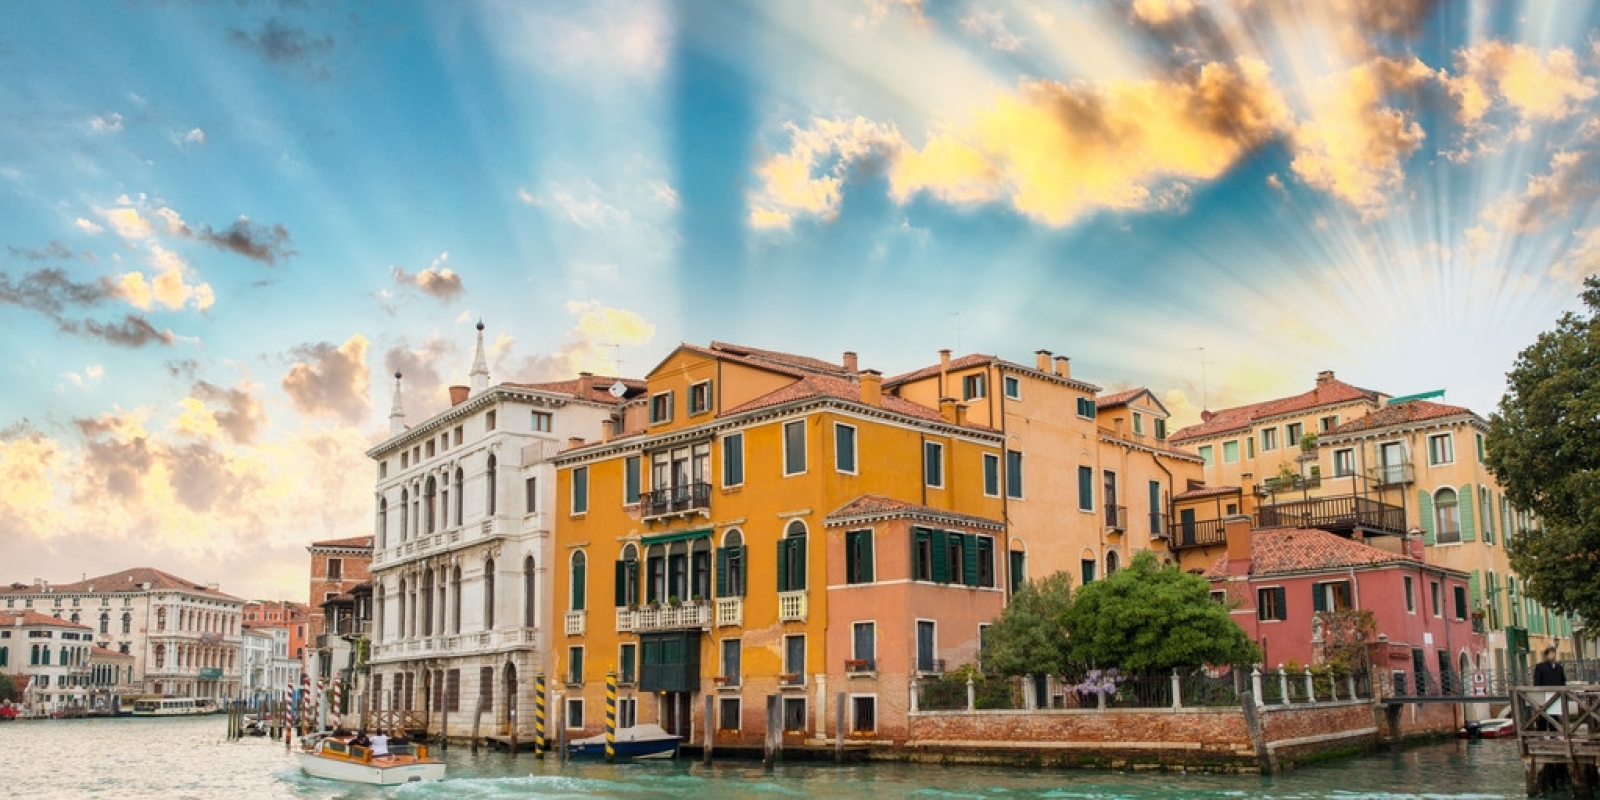 The advantages of purchasing a property in Italy